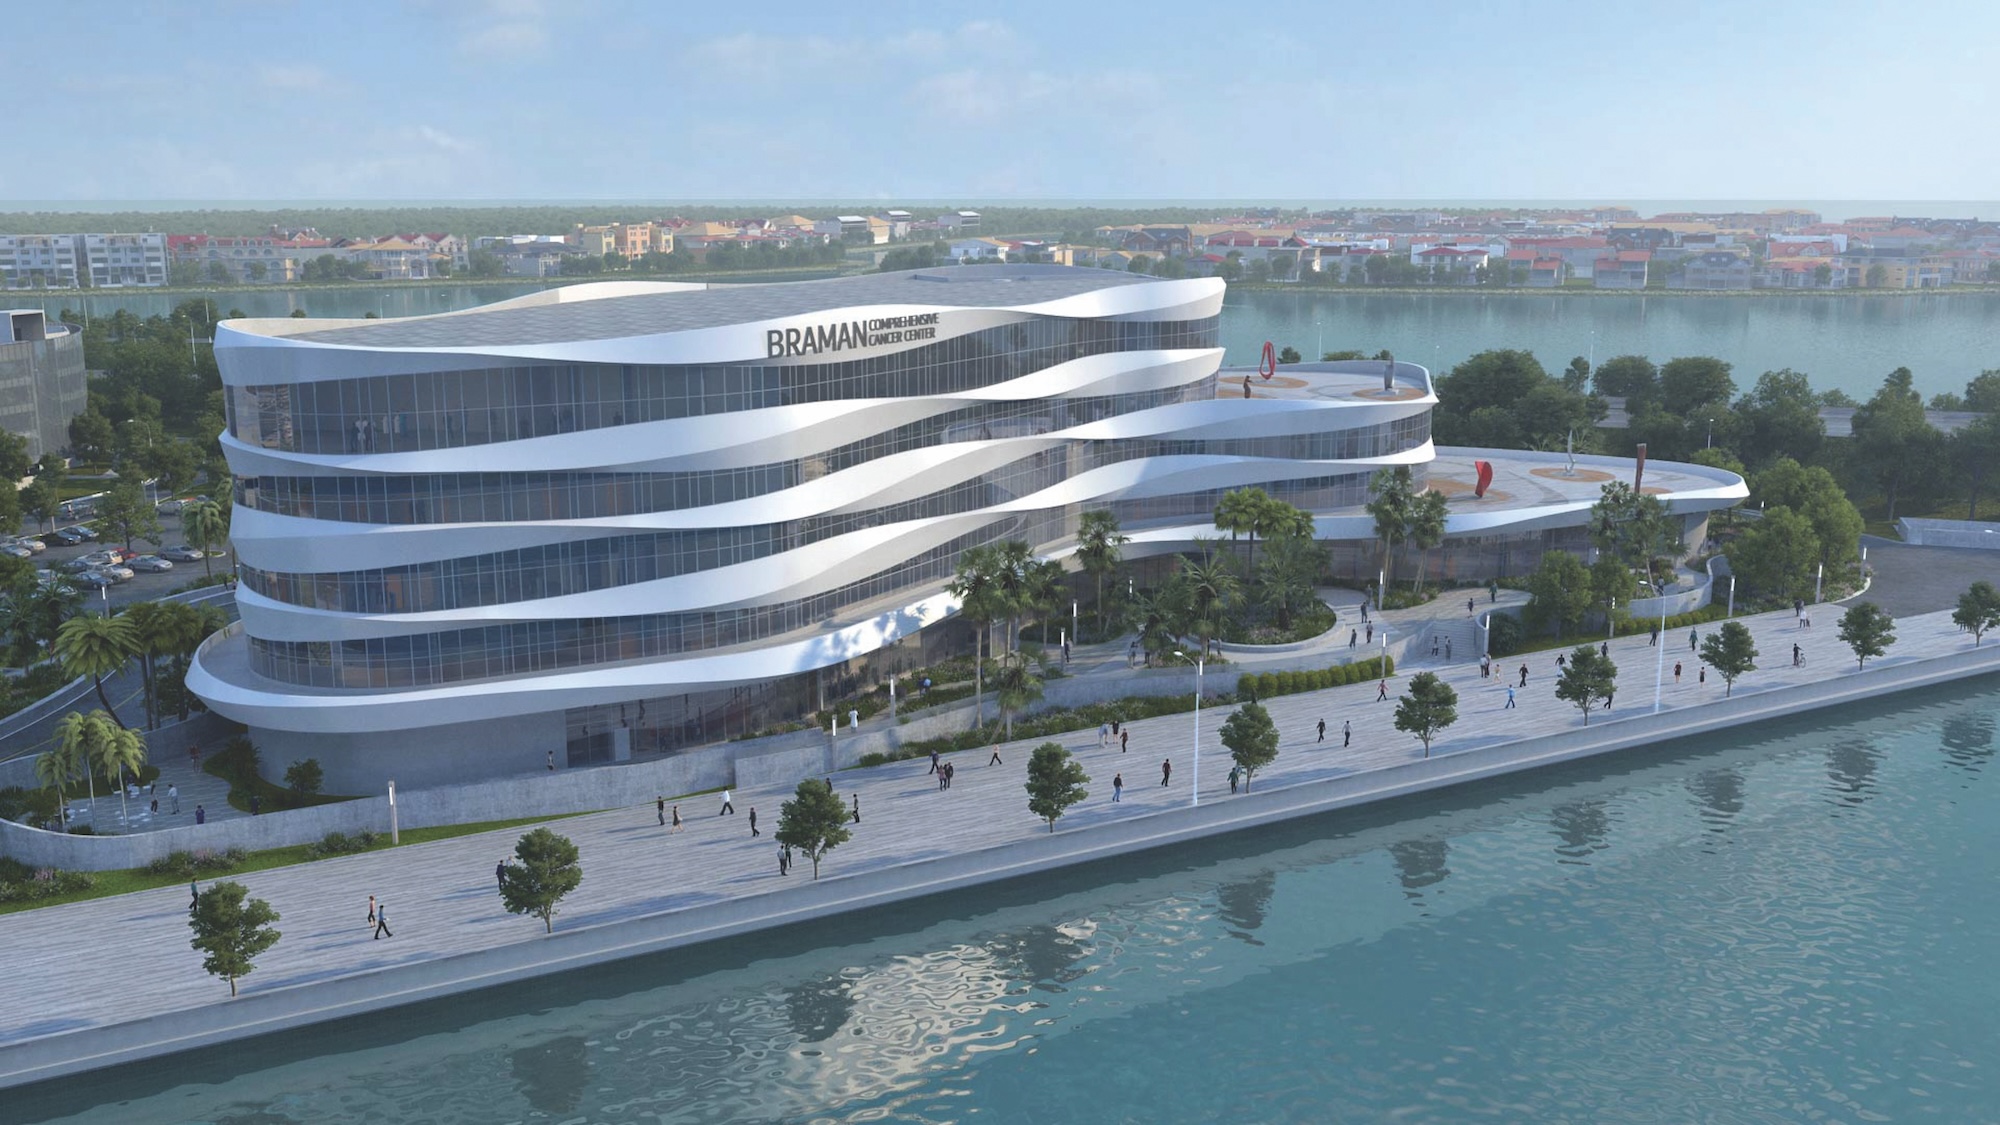 The 56 infusion bays within the Braman Comprehensive Cancer Center in Miami Beach, Fla., will all have views of Biscayne Bay, a manifestation of the hospital’s wellness environment.